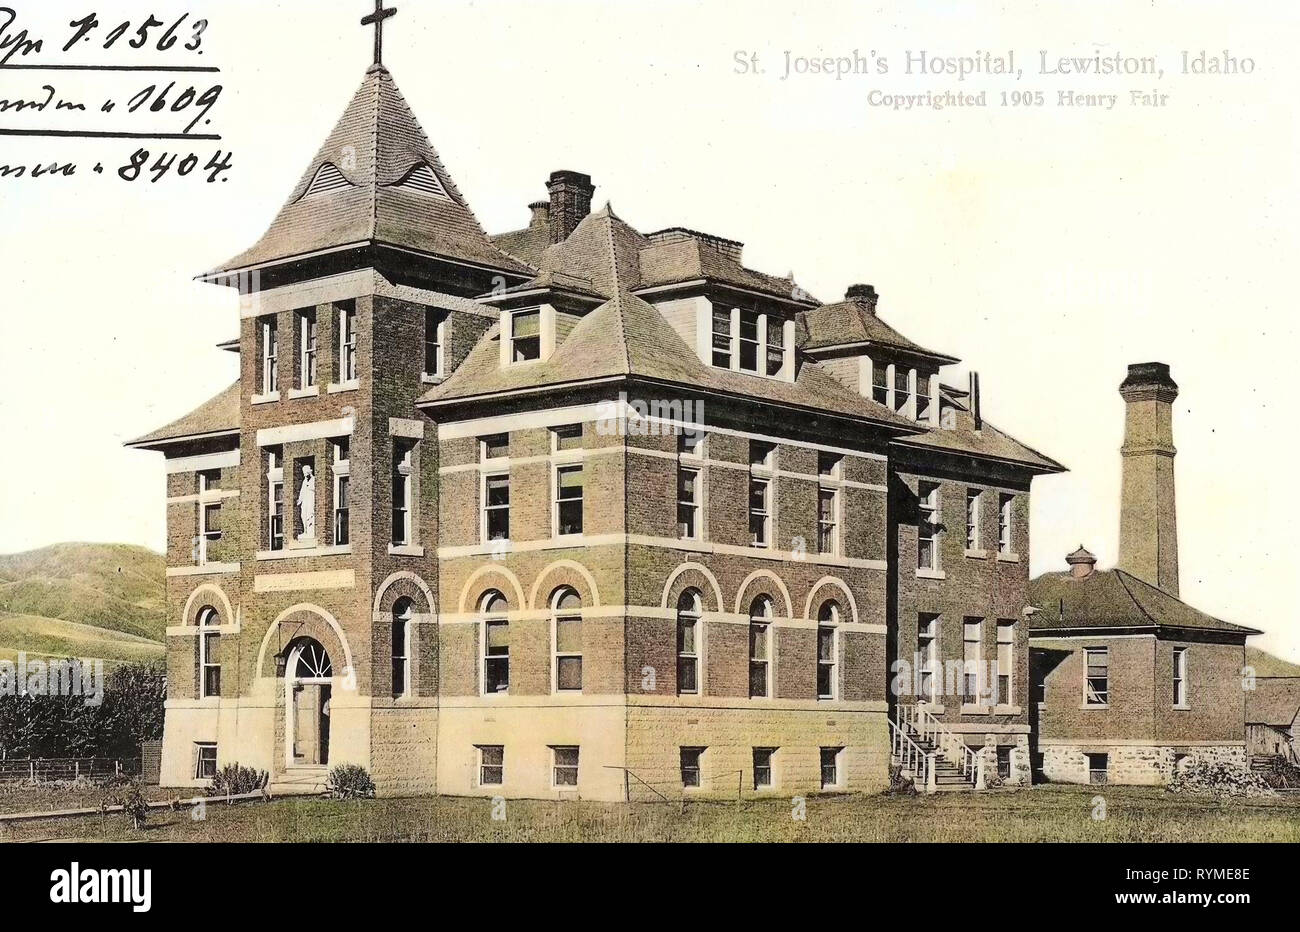 Hospitals in the United States, Christian crosses in the United States, 1906, Idaho, Lewiston, St. Josephs Hospital Lewiston Stock Photo